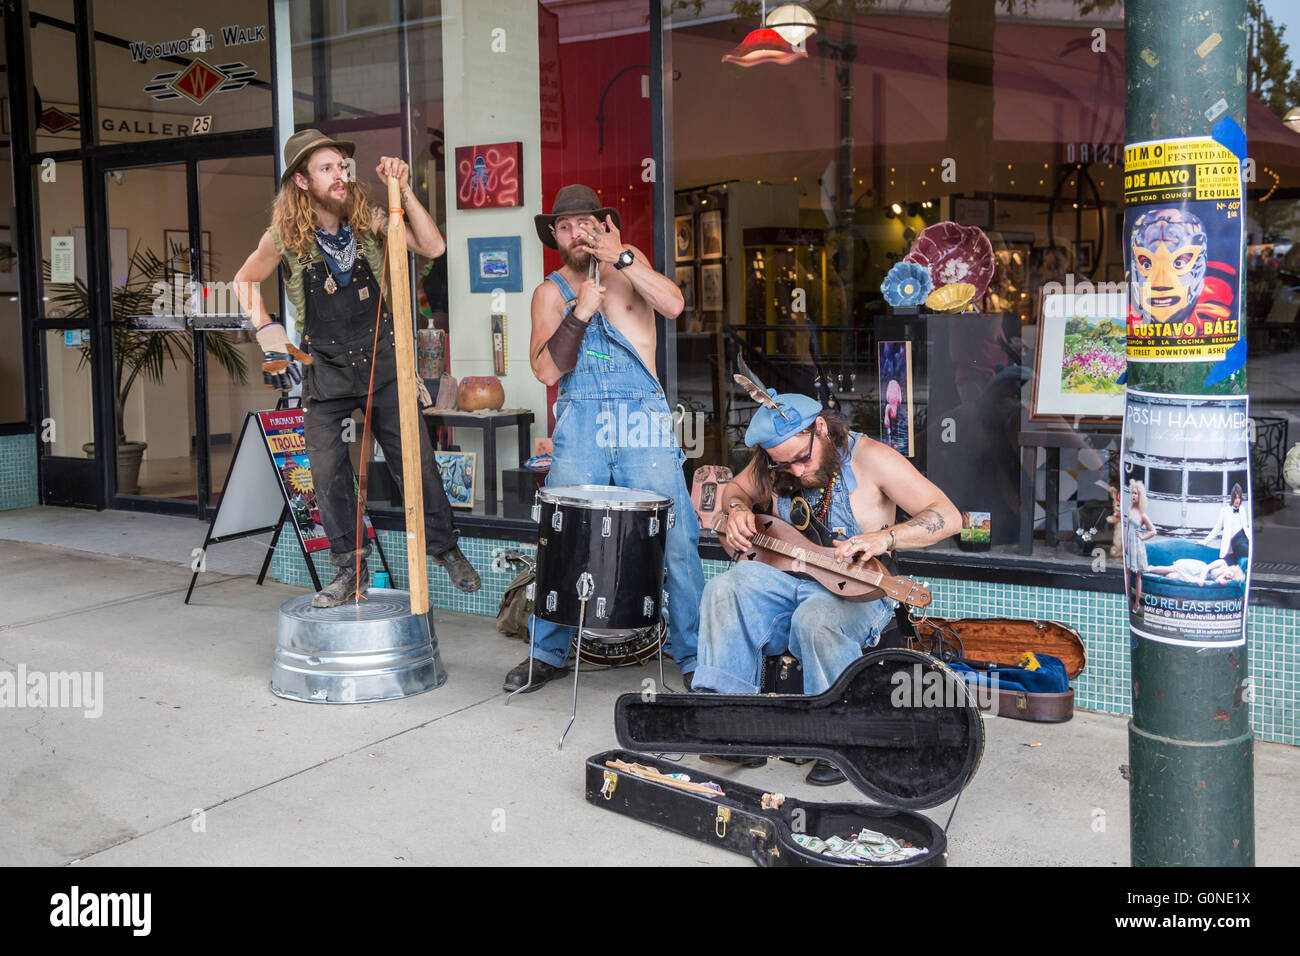 Asheville, North Carolina - A jug band plays for donations on a downtown street. Stock Photo